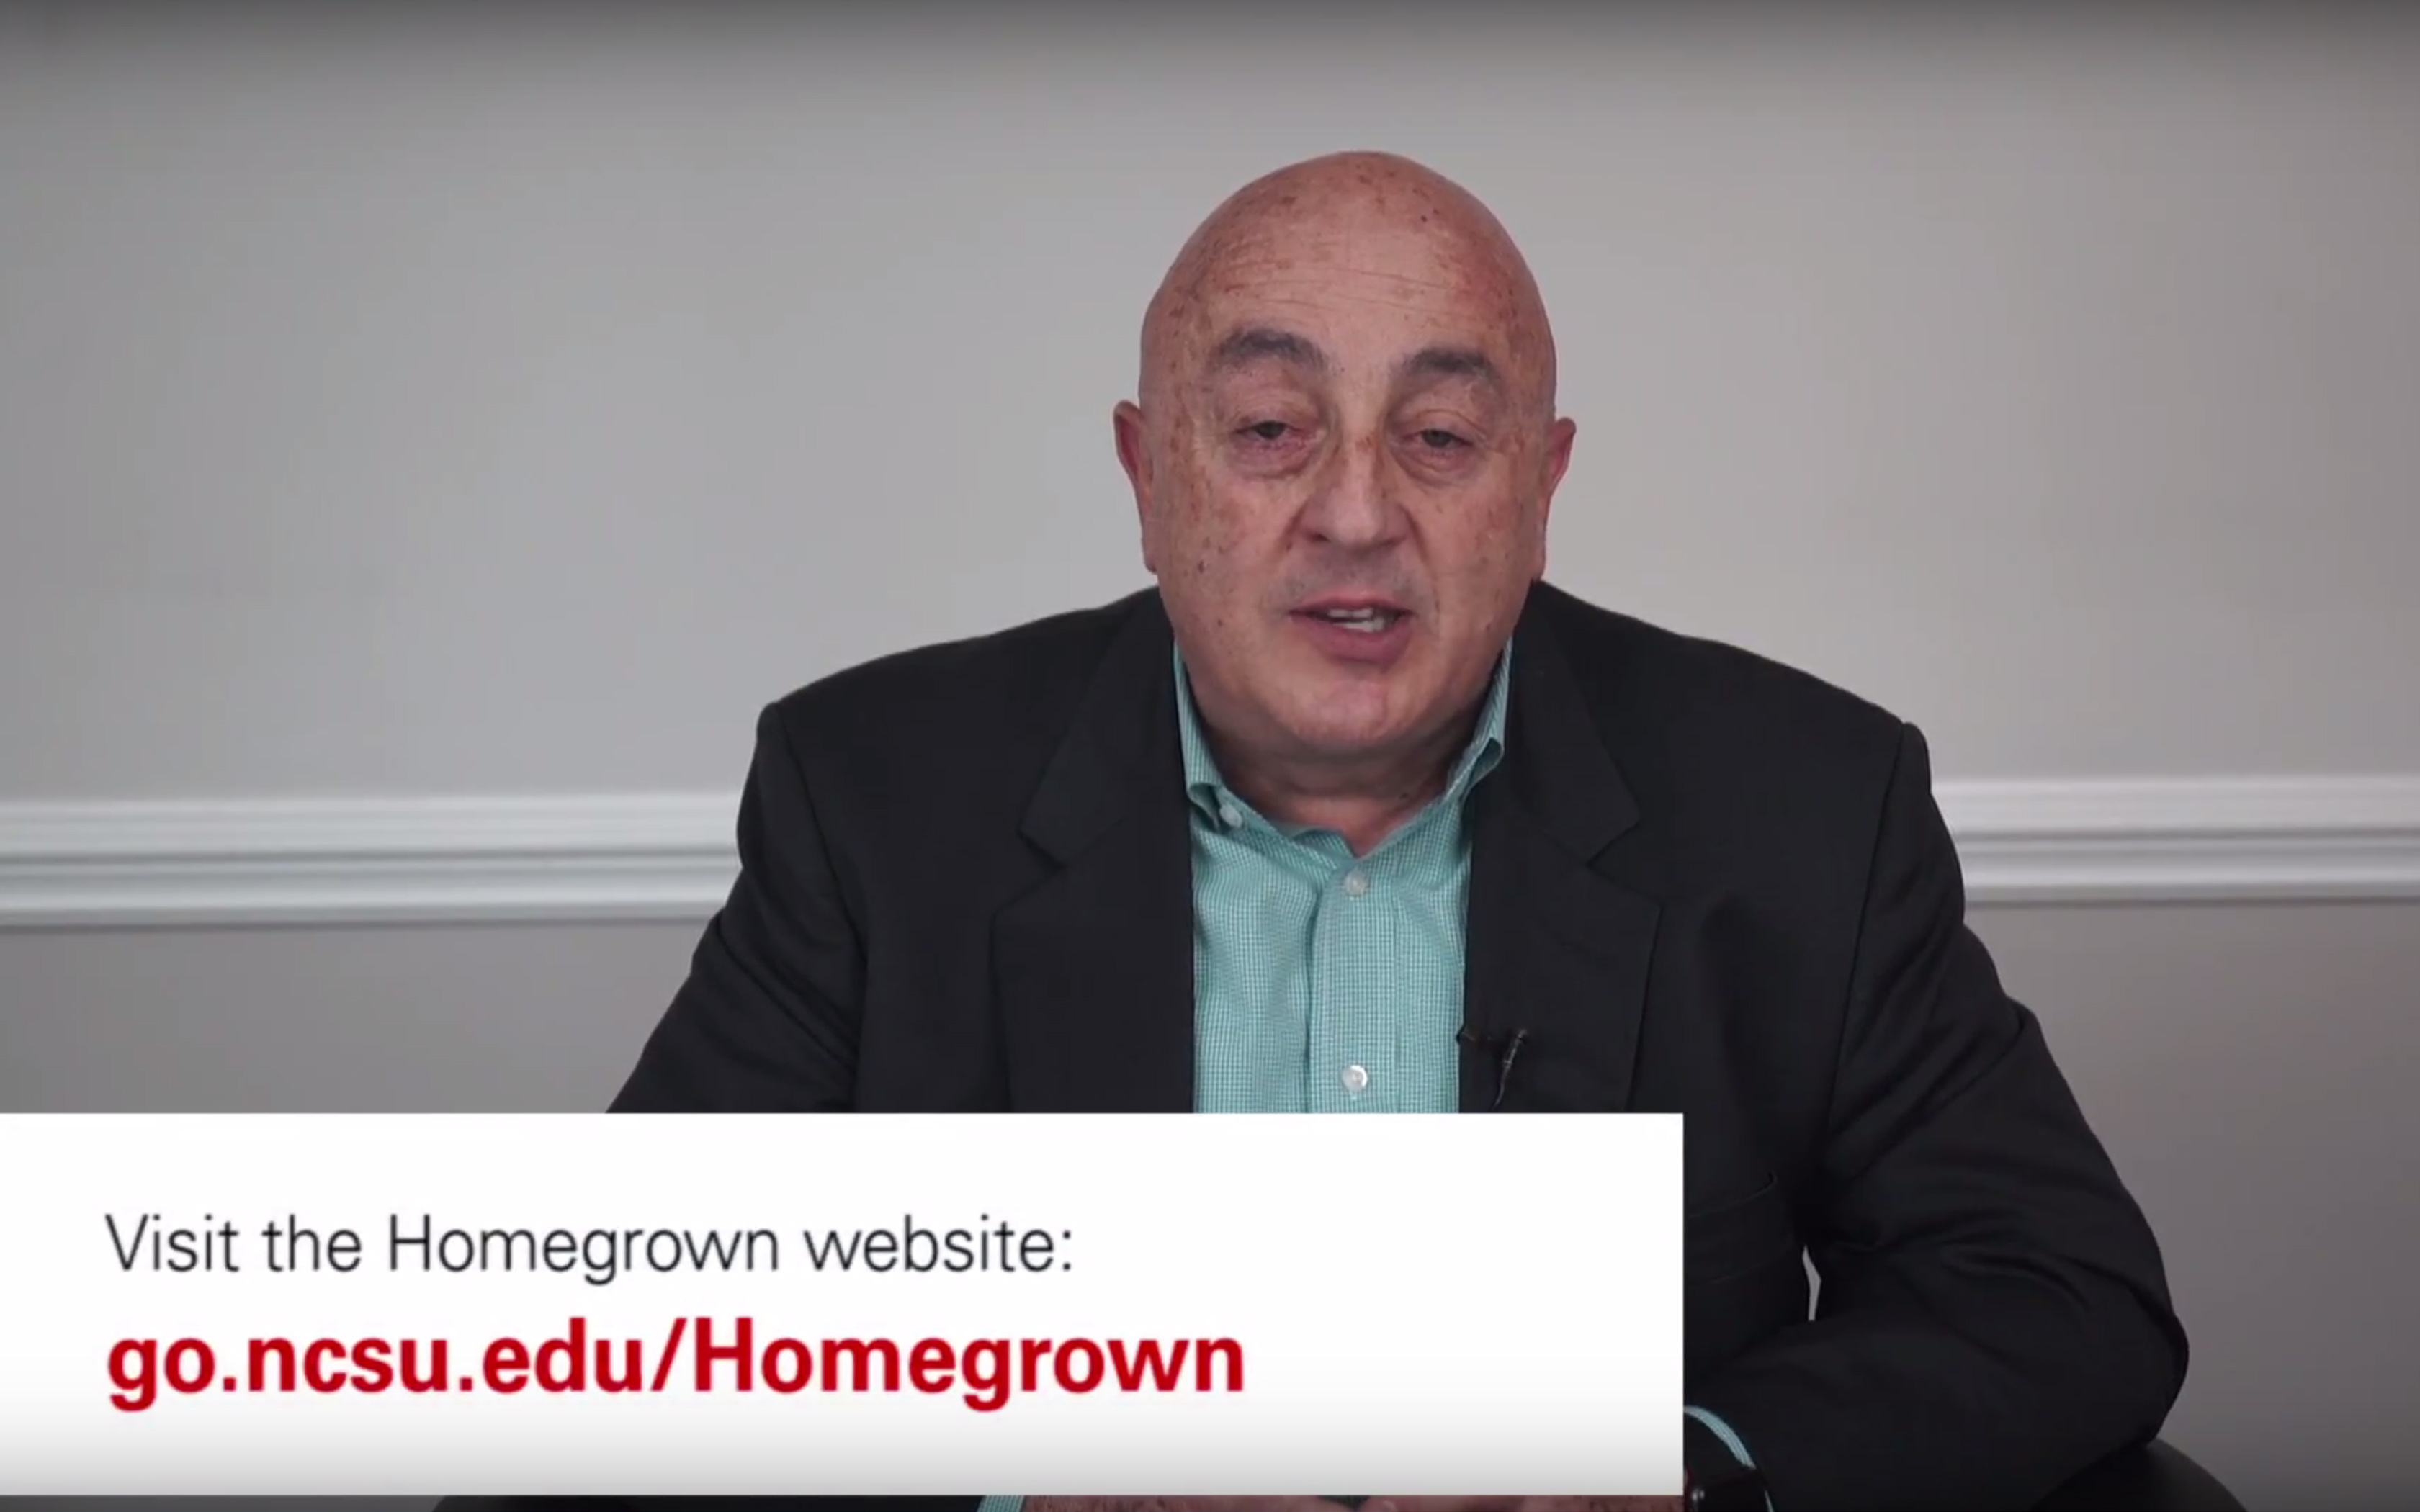 Homegrown Intro Video_NC State Extension Director Rich Bonanno